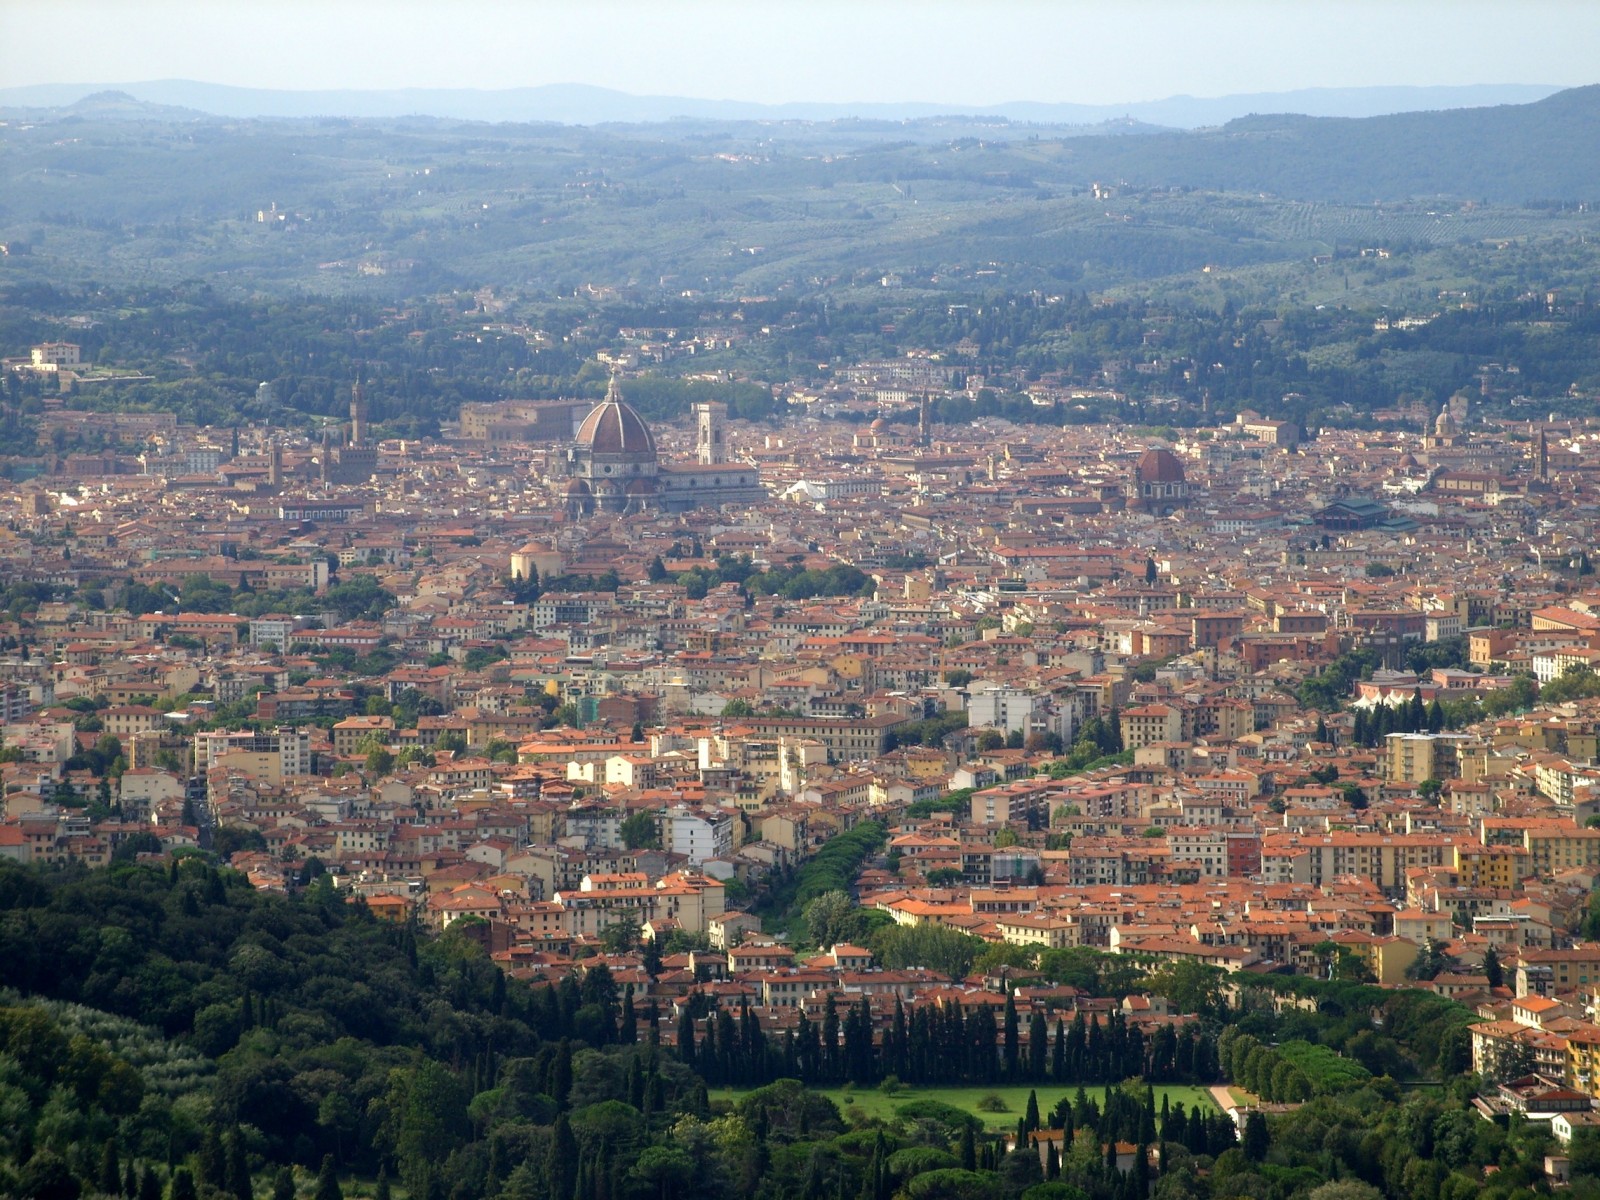 View from Fiesole